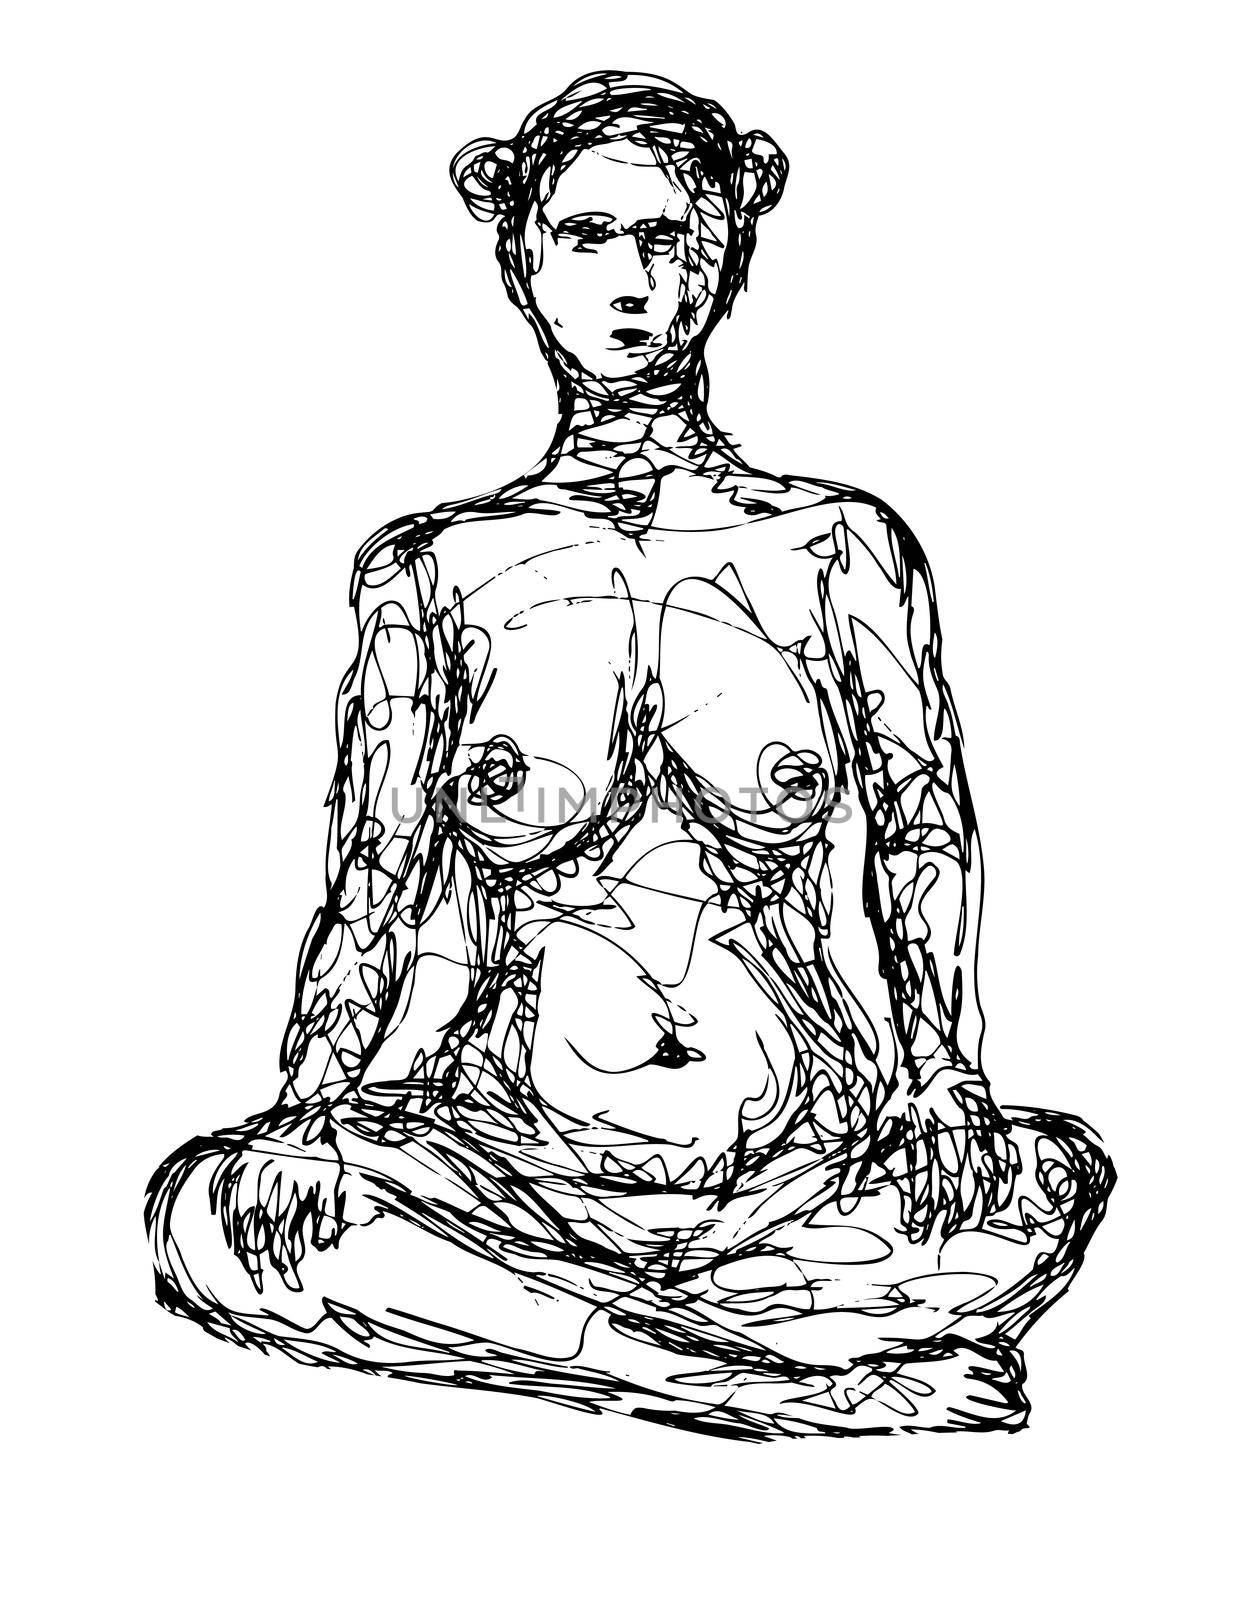 Doodle art illustration of a nude female human figure posing seated or cross sitting with legs crossed done in continuous line drawing style in black and white on isolated background.